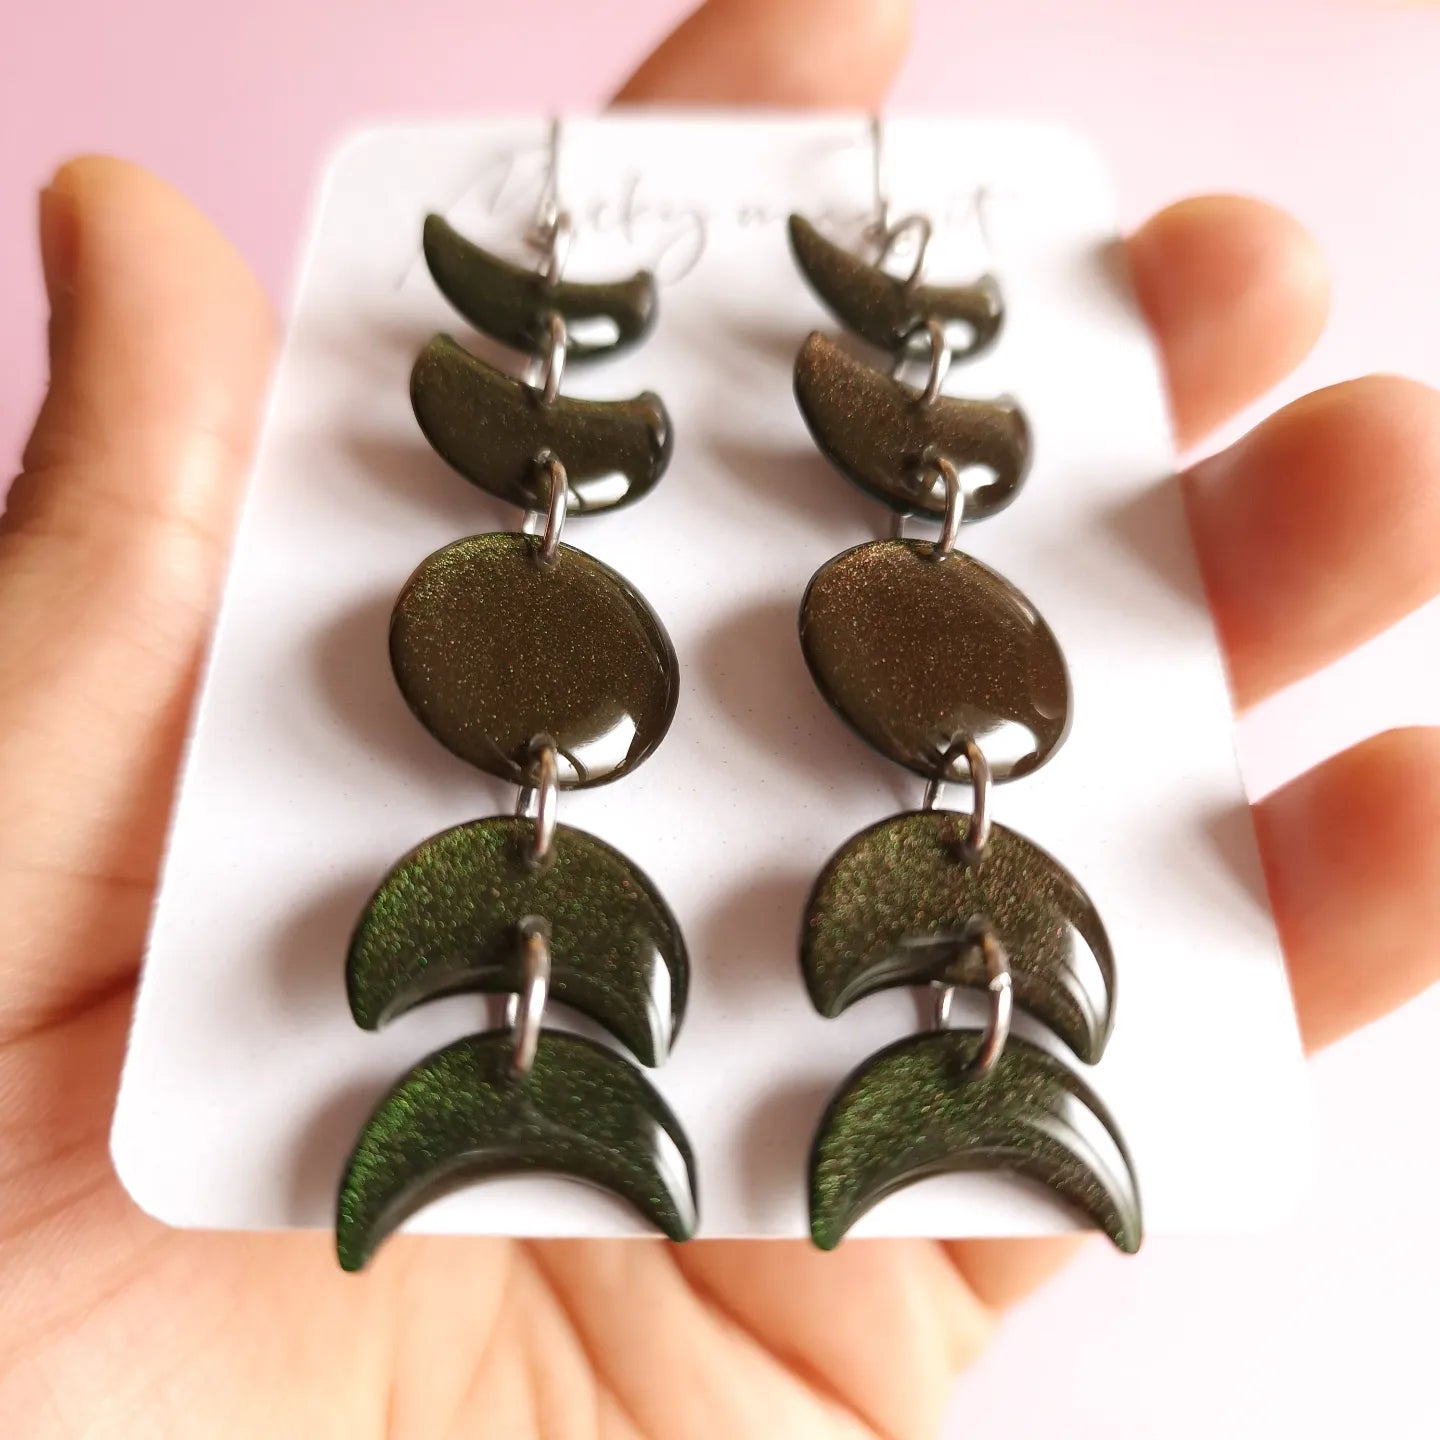 Hecate moon phase earrings in Whimsigoth